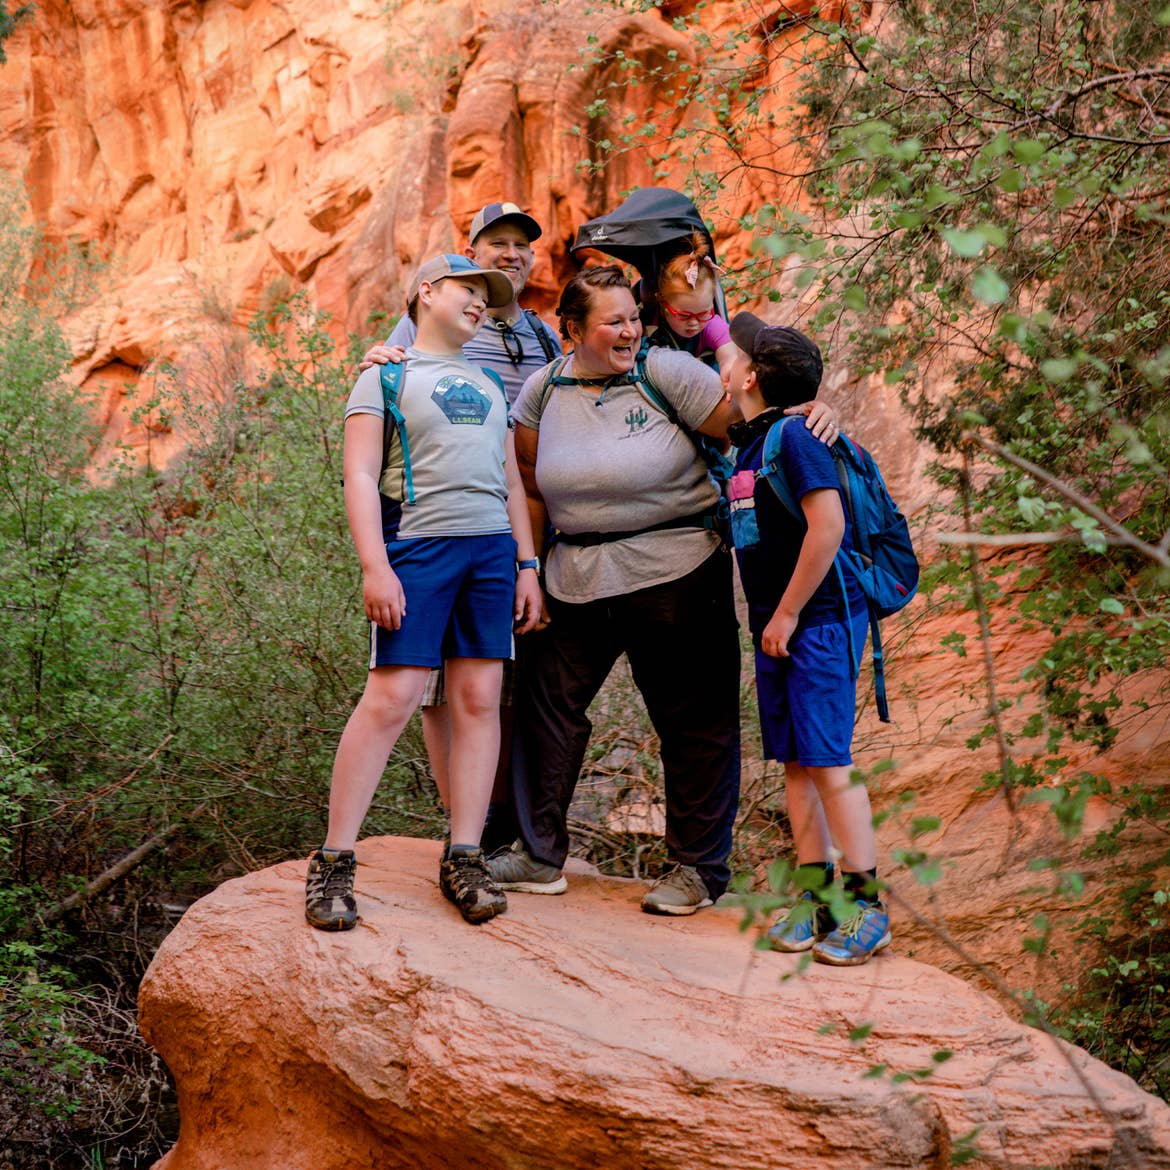 Featured Contributor, Melody Forsyth (middle), backpacks with her family on an orange rock formation.